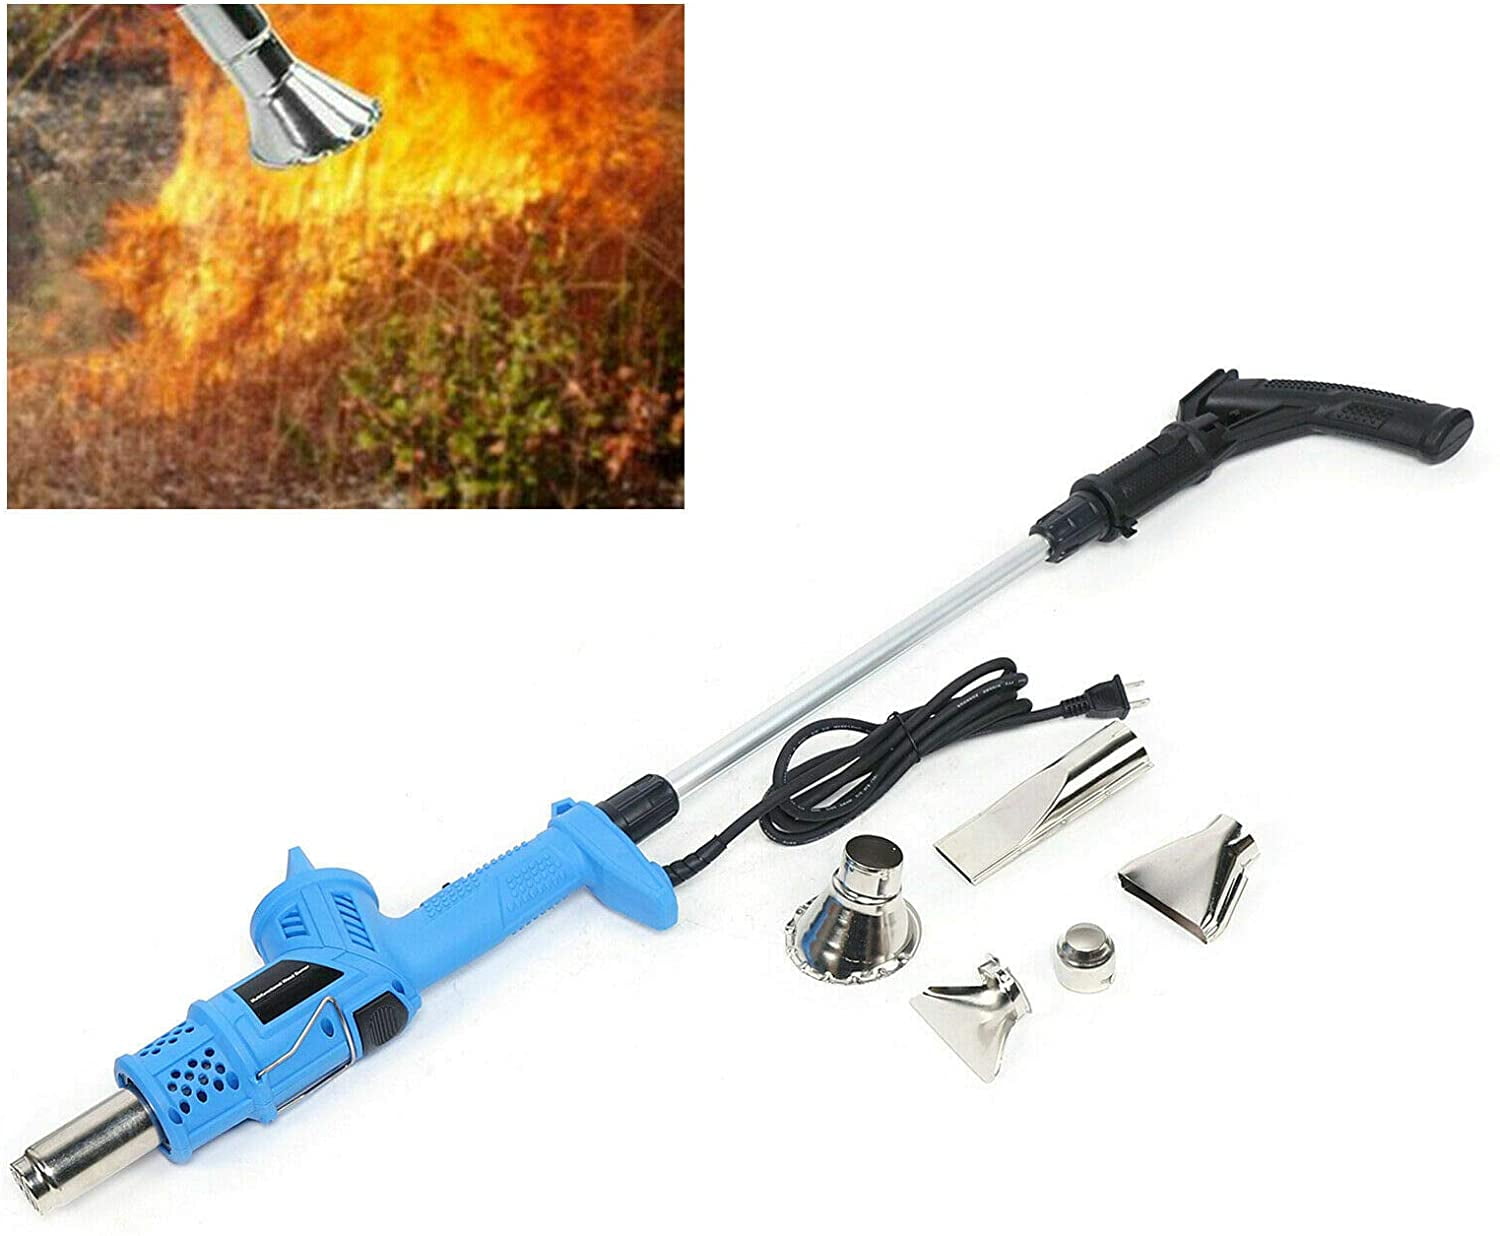 Weed Electric Burner No Weed Electric Burner Lawn Weeding Cutting Machine Quick Weed Removal In A Few Seconds Chemical-Free Safe And Non-Toxic Burner 2 In 1 Covok Burning Weeding 